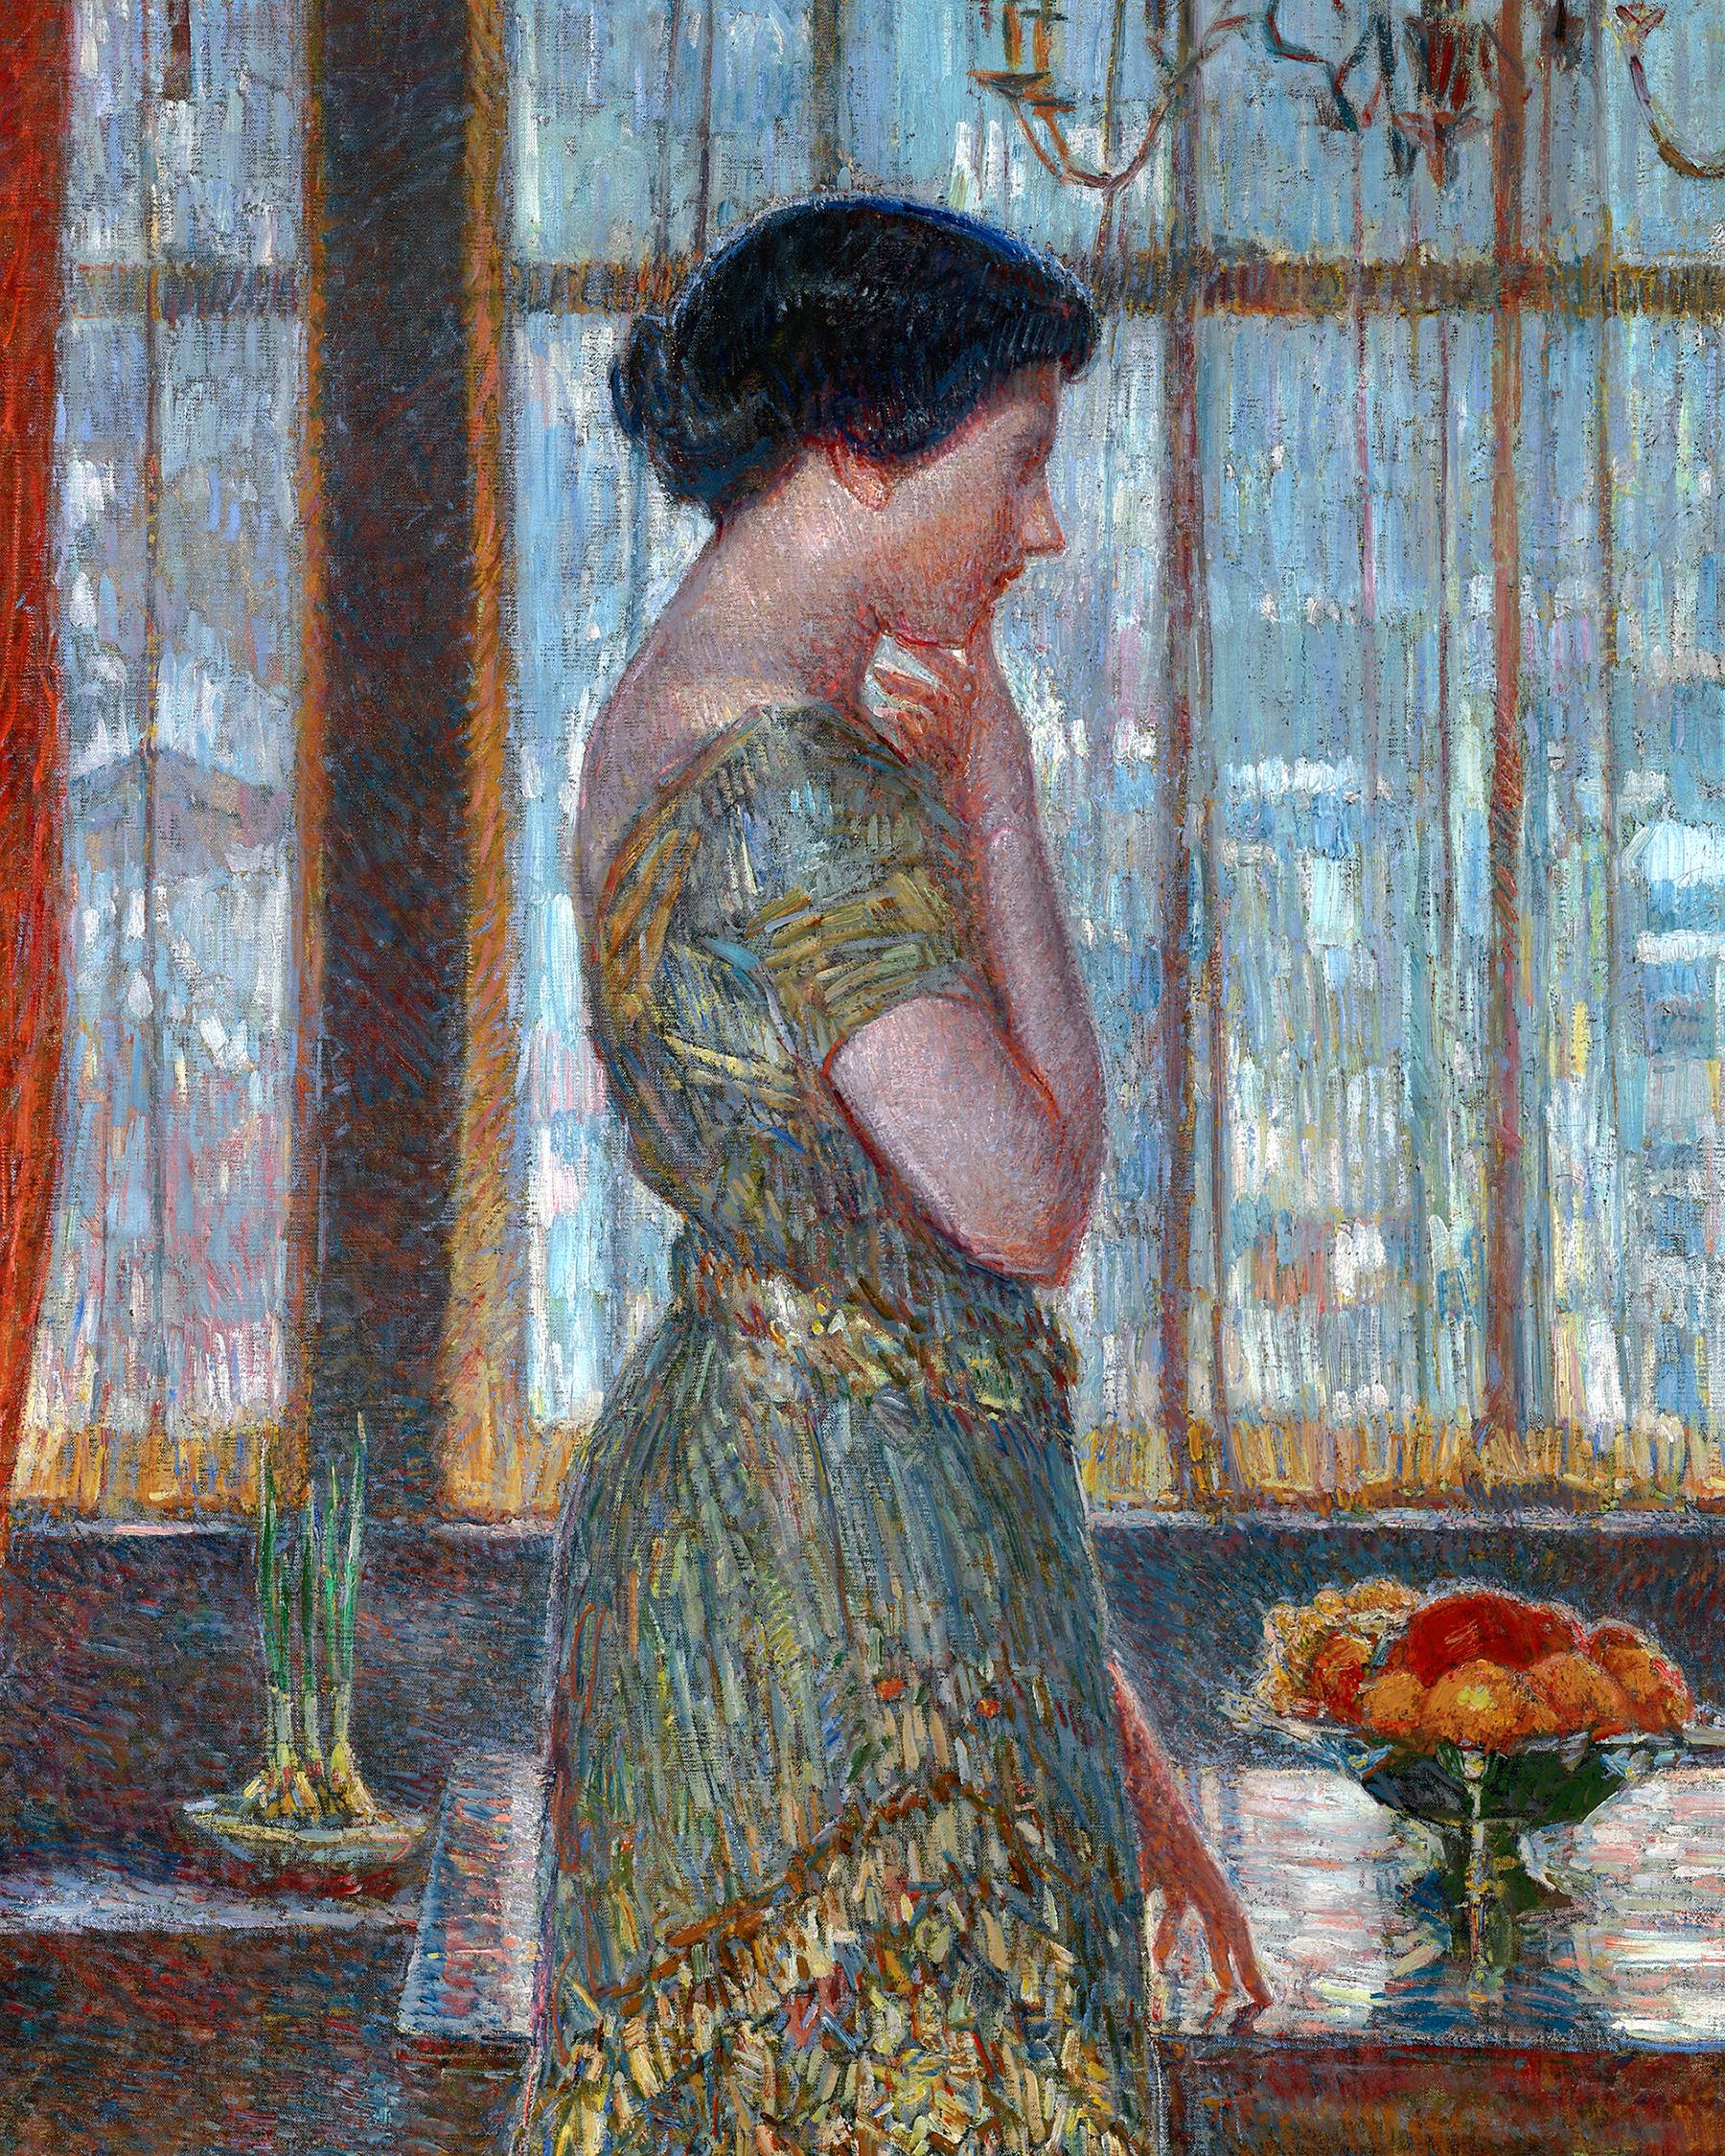 New York Winter Window - Impressionist Painting by Childe Hassam